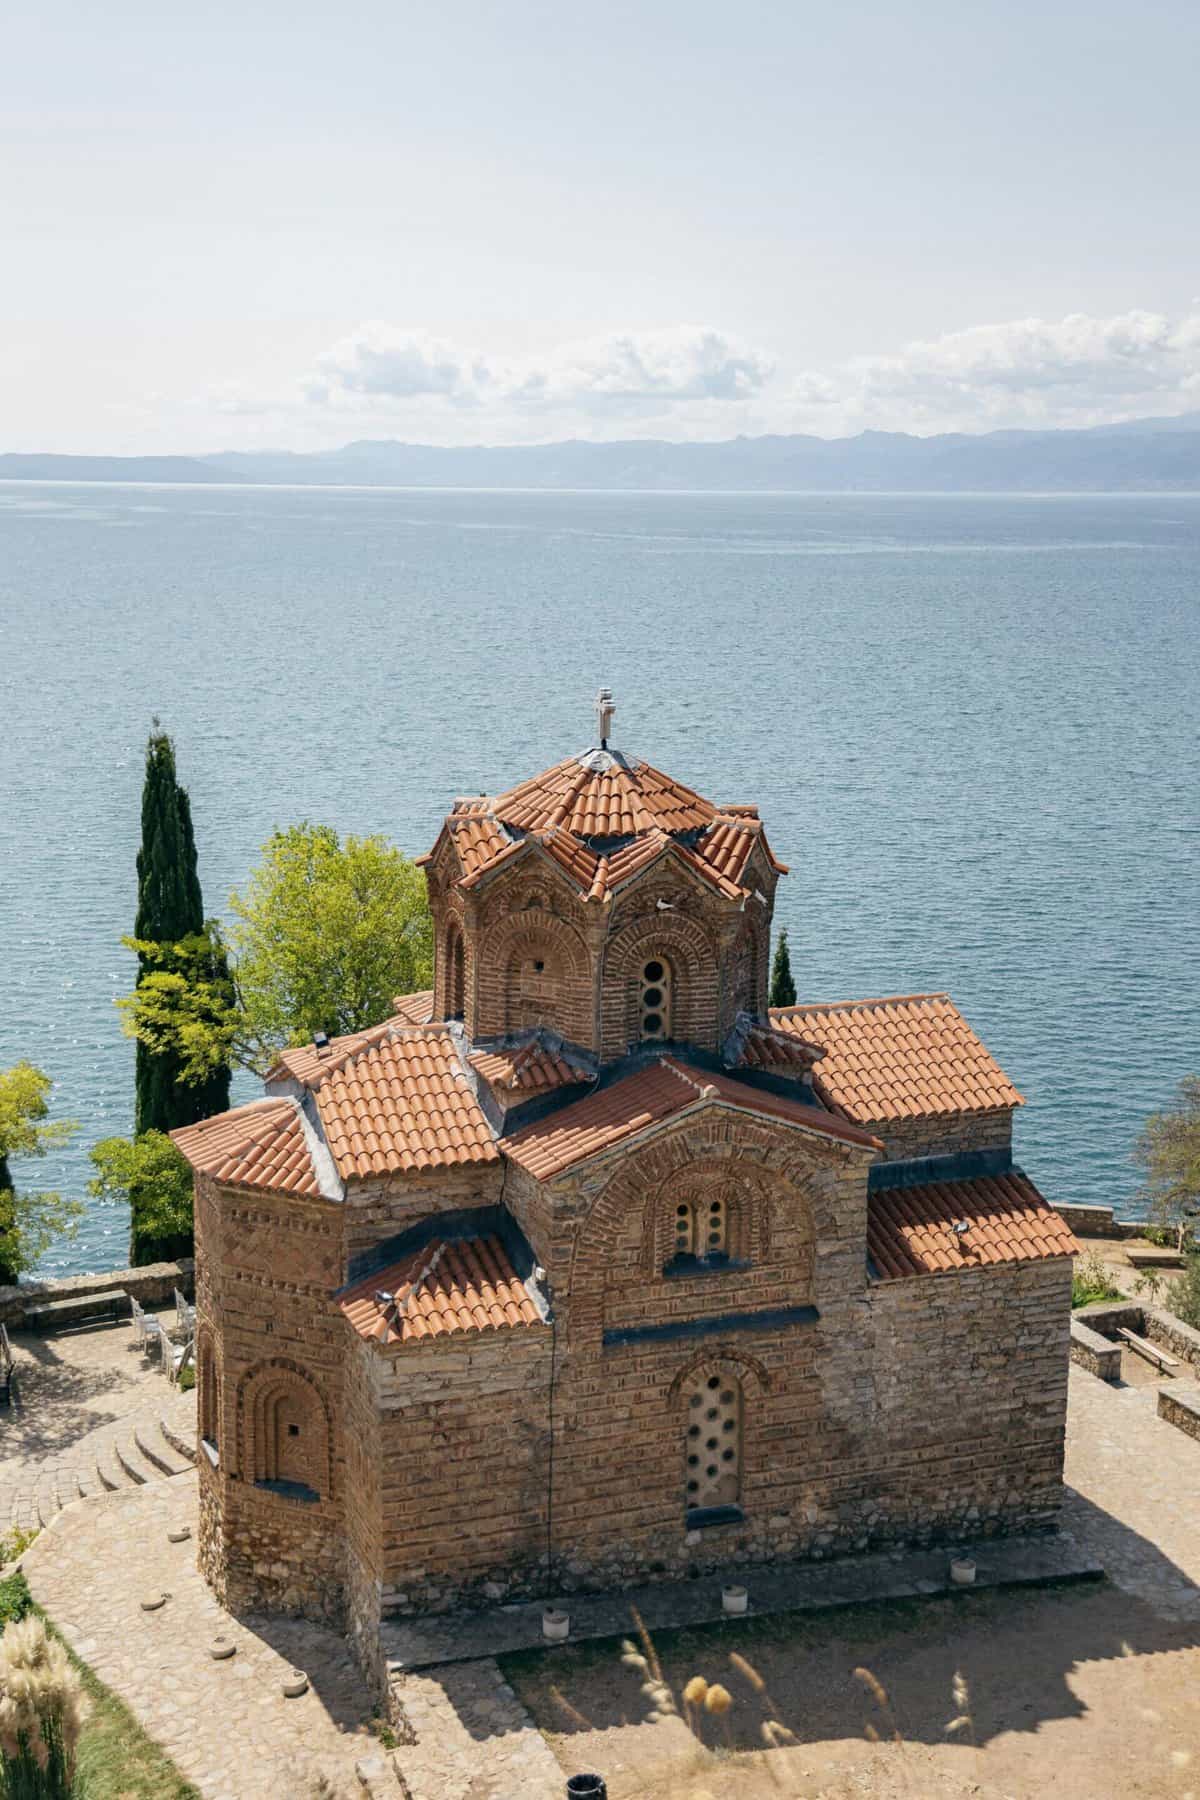 Skopje to Ohrid: how to reach Ohrid quickly and affordably